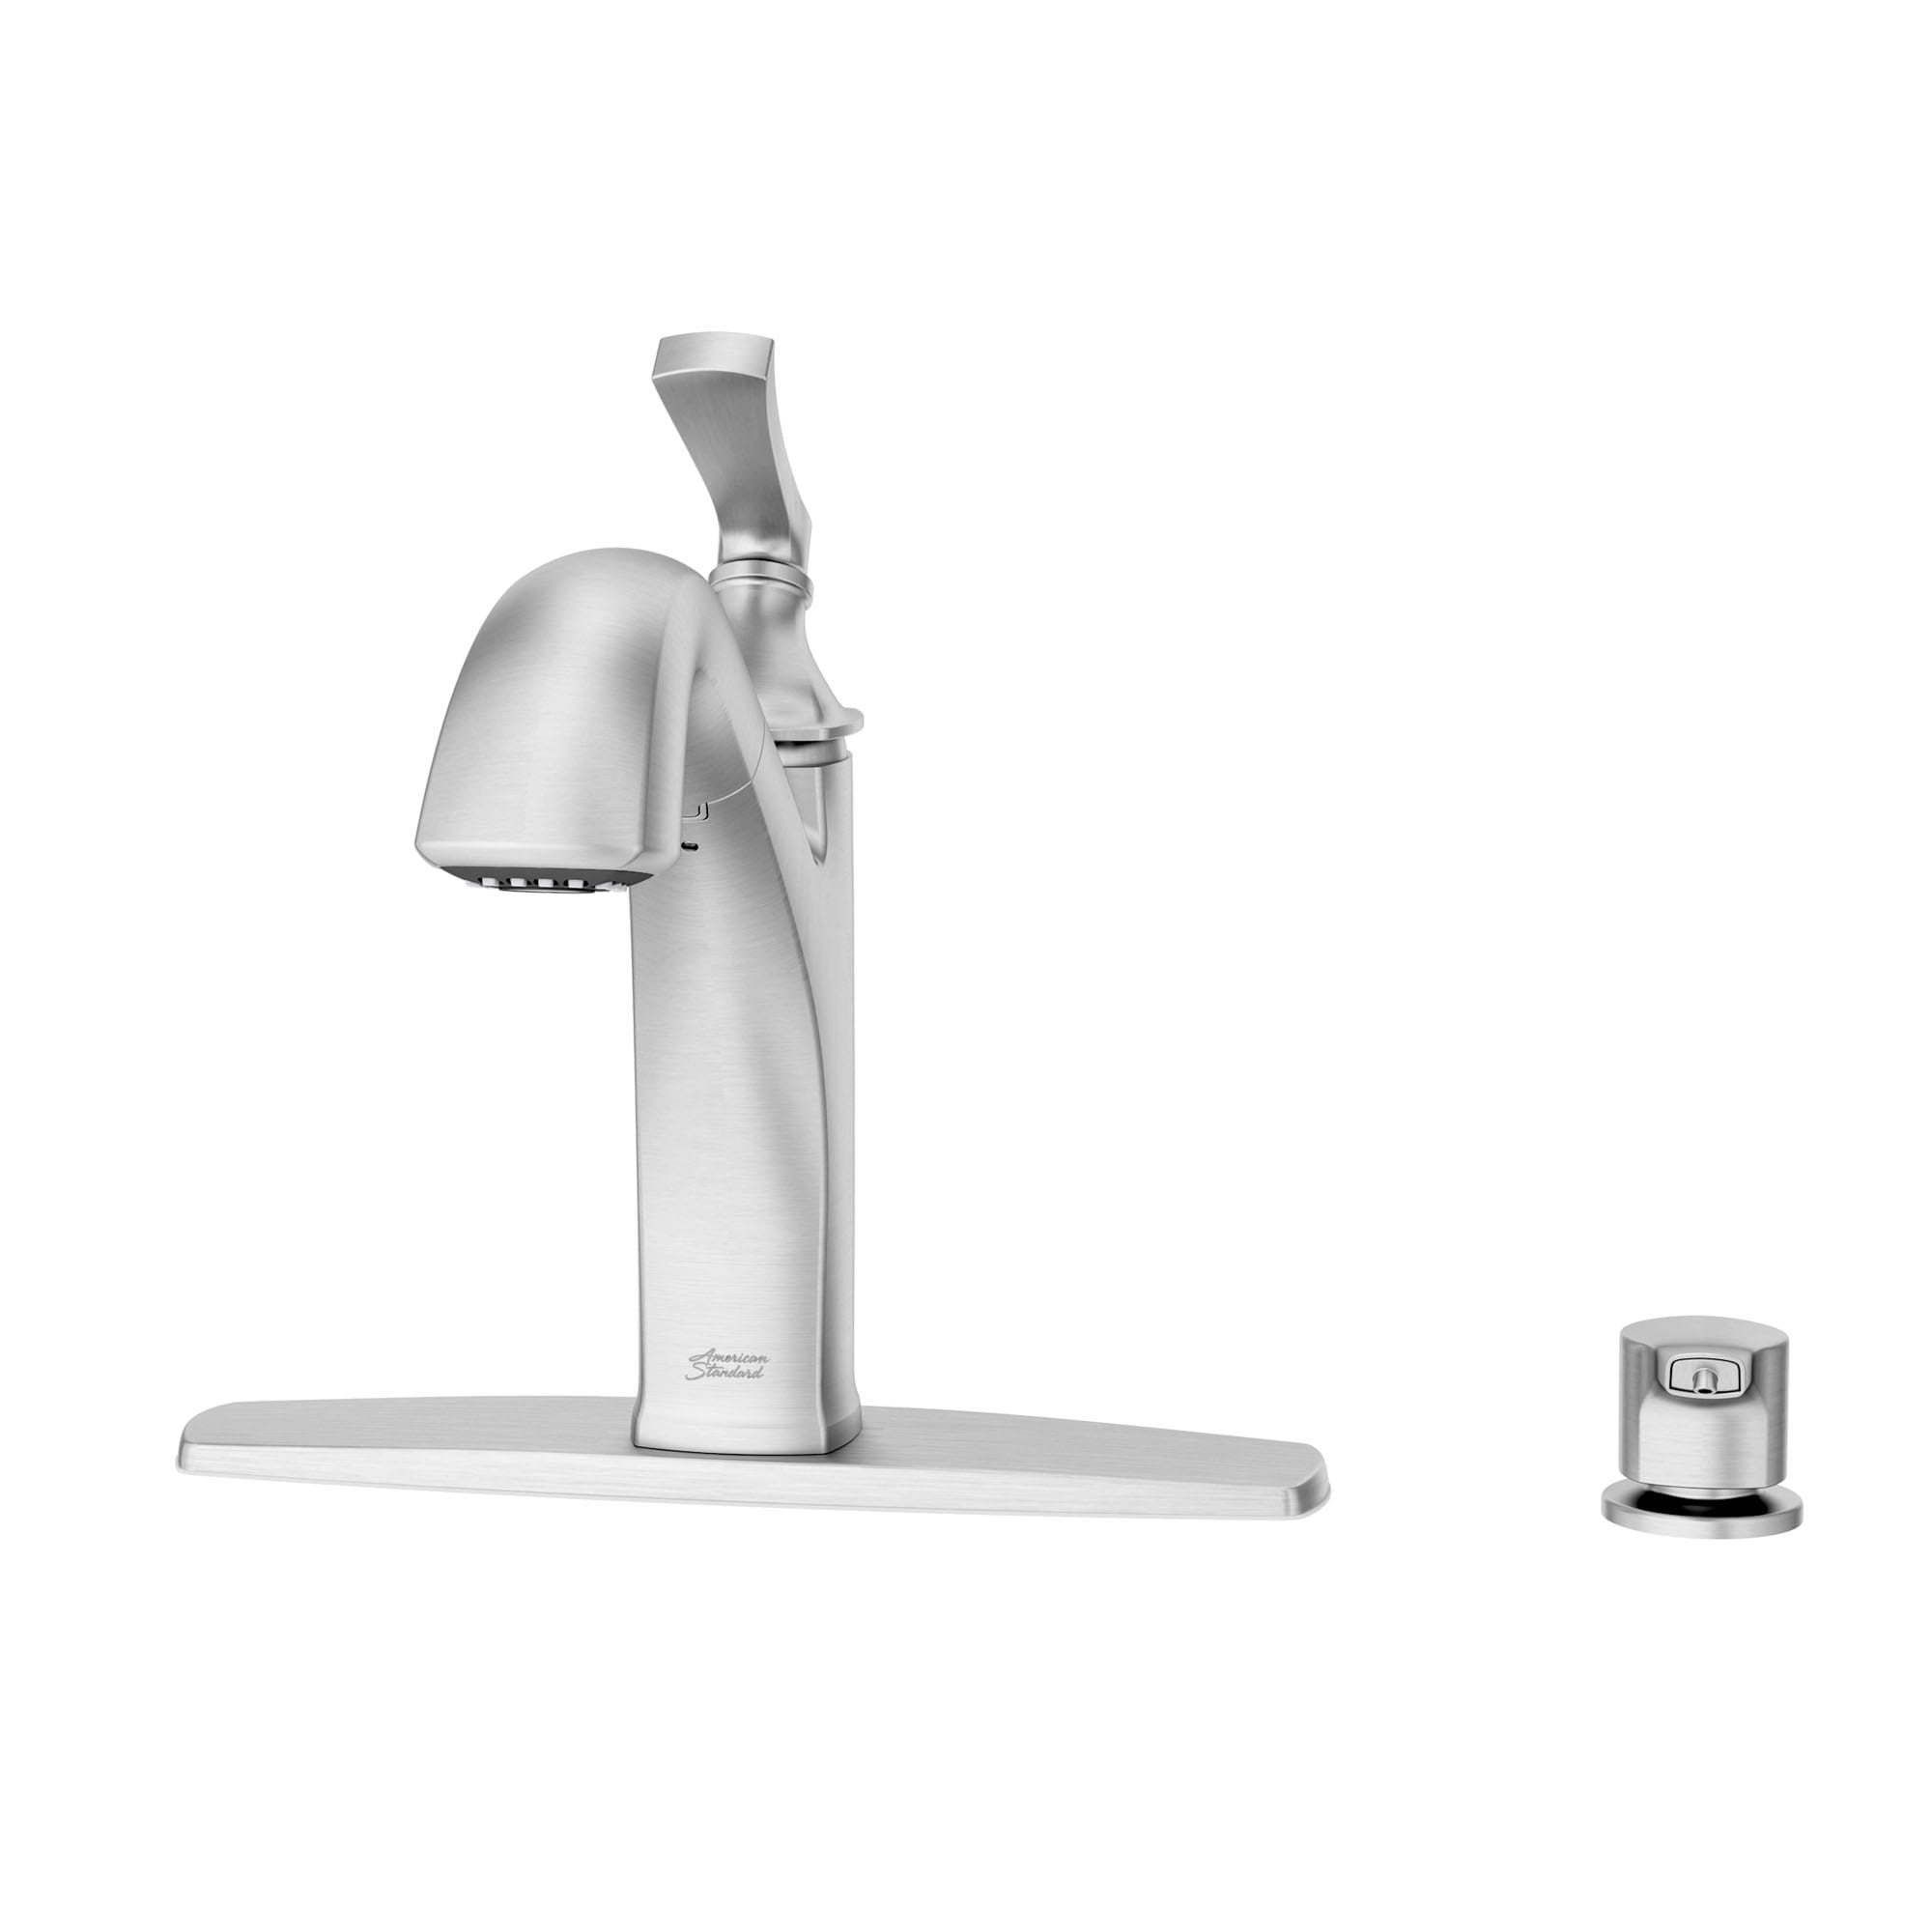 Kaleta® Pull-Out Kitchen Faucet With Soap Dispenser